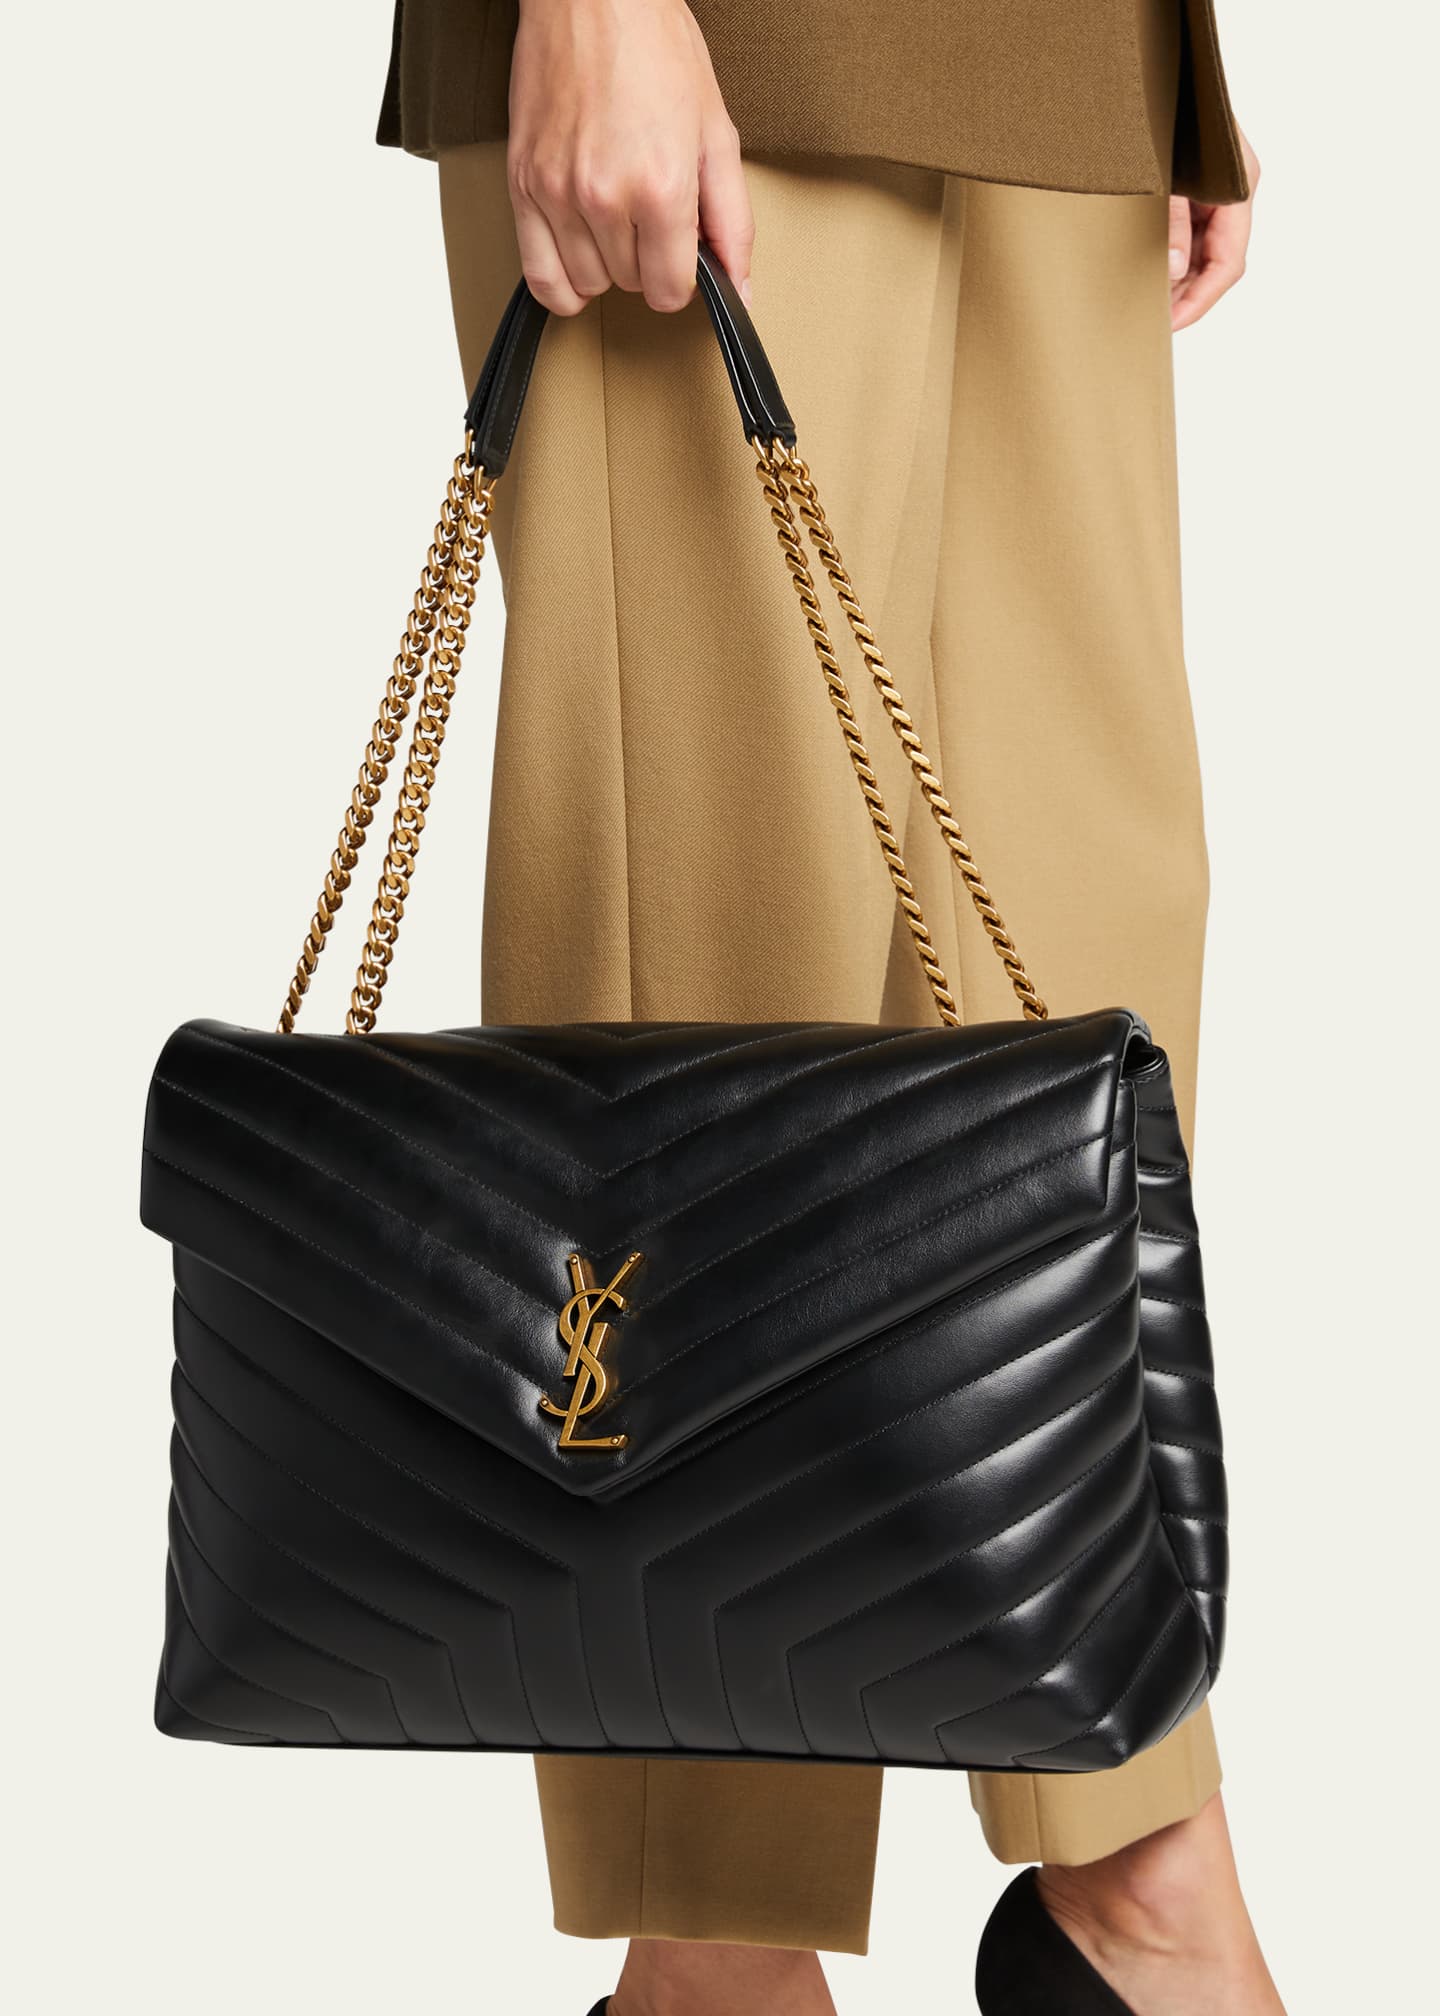 Saint Laurent Loulou Large in Quilted Leather - Black - Women